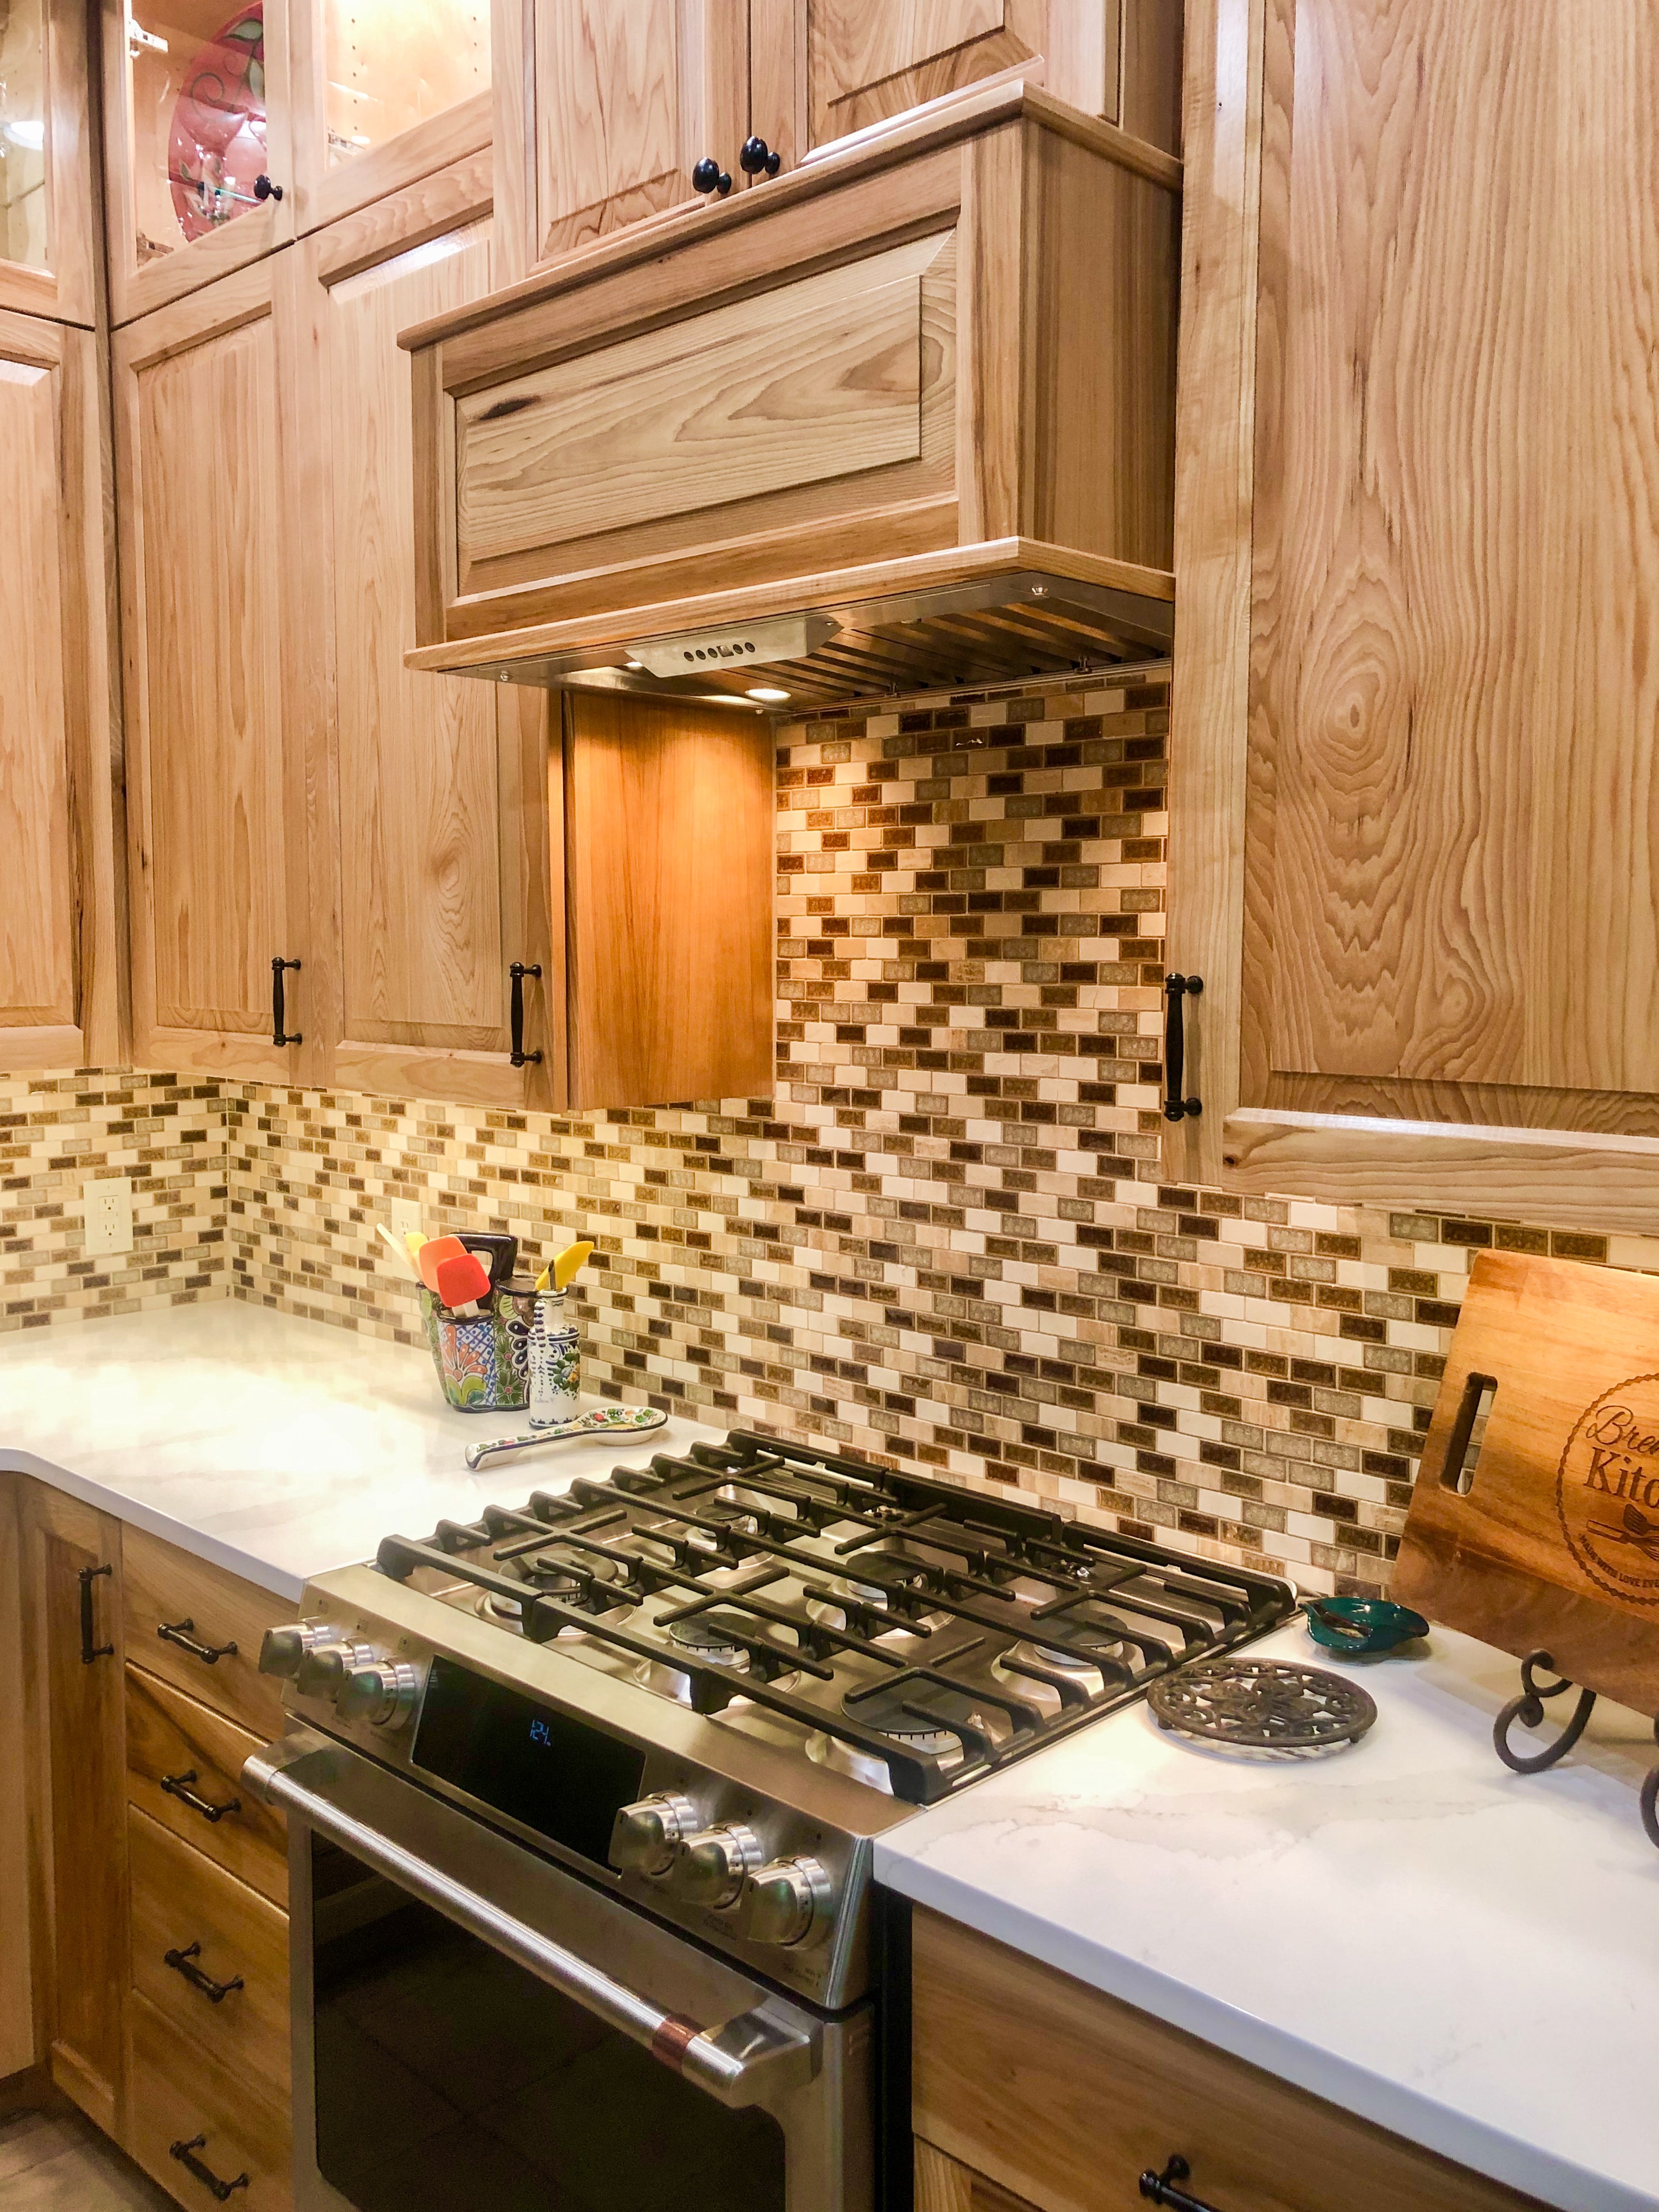 Wooden Cabinets with Marble countertops